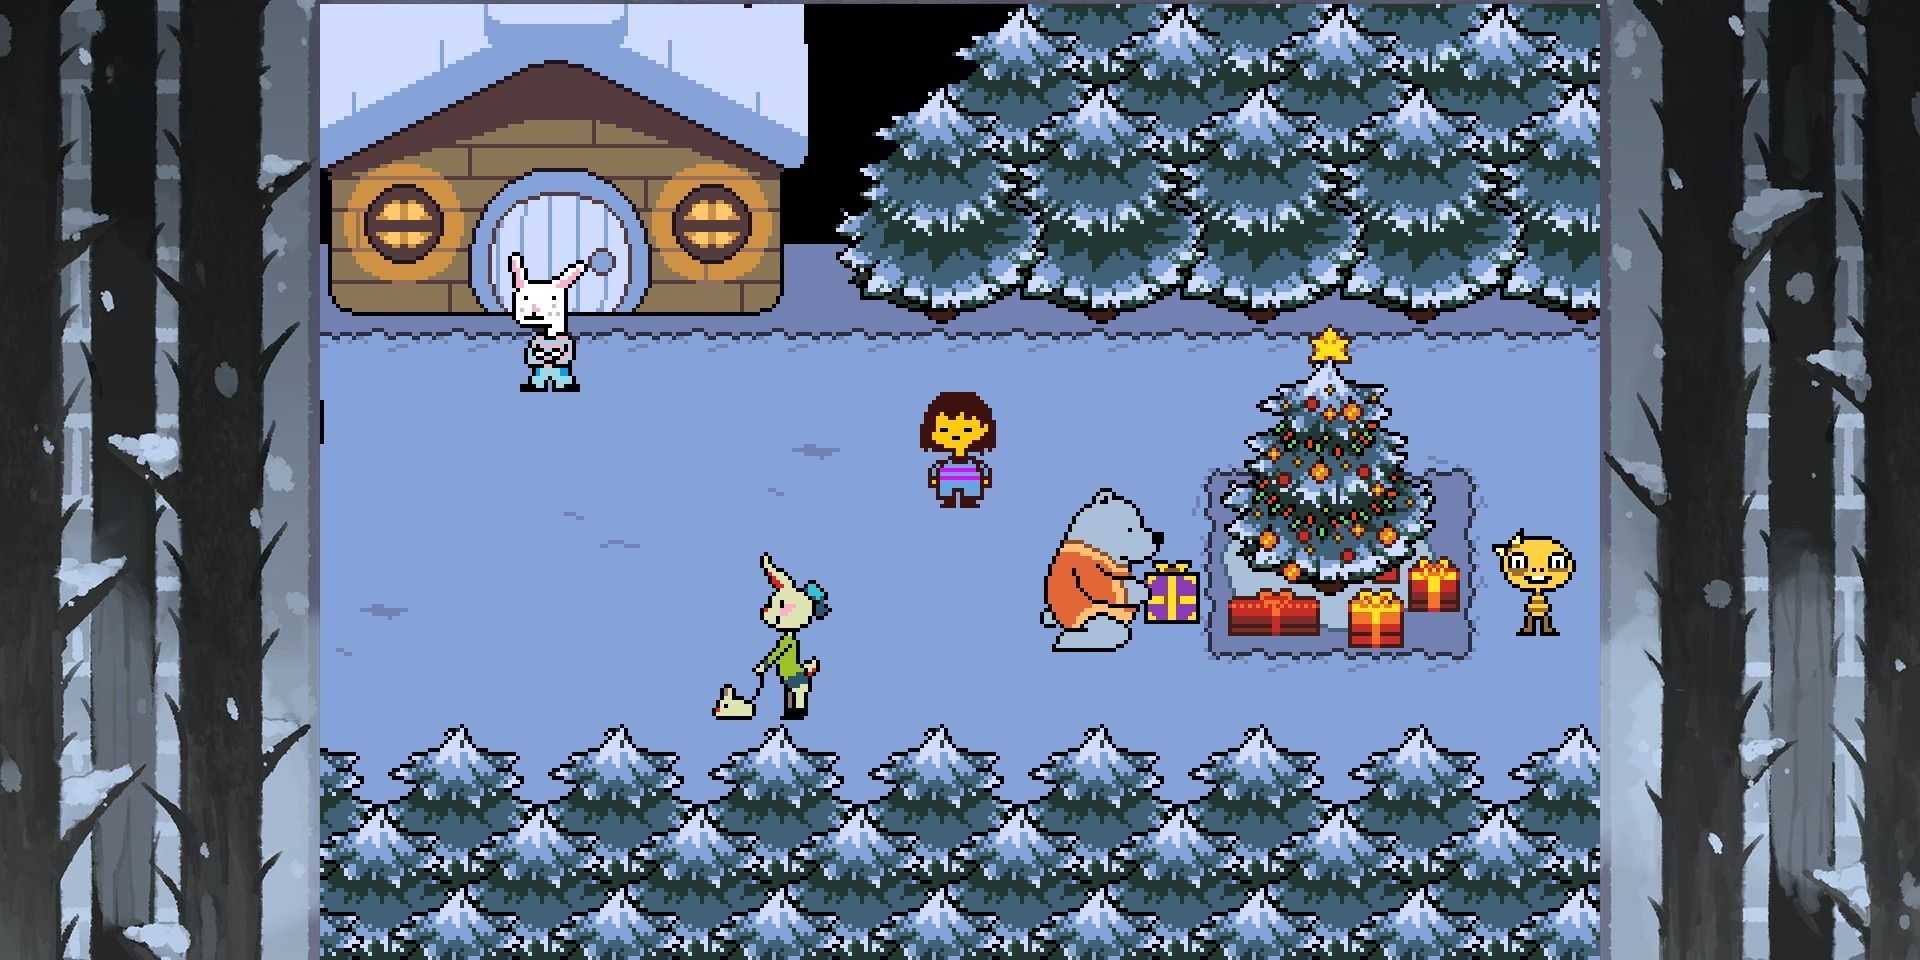 The main character in Snowdin in Undertale